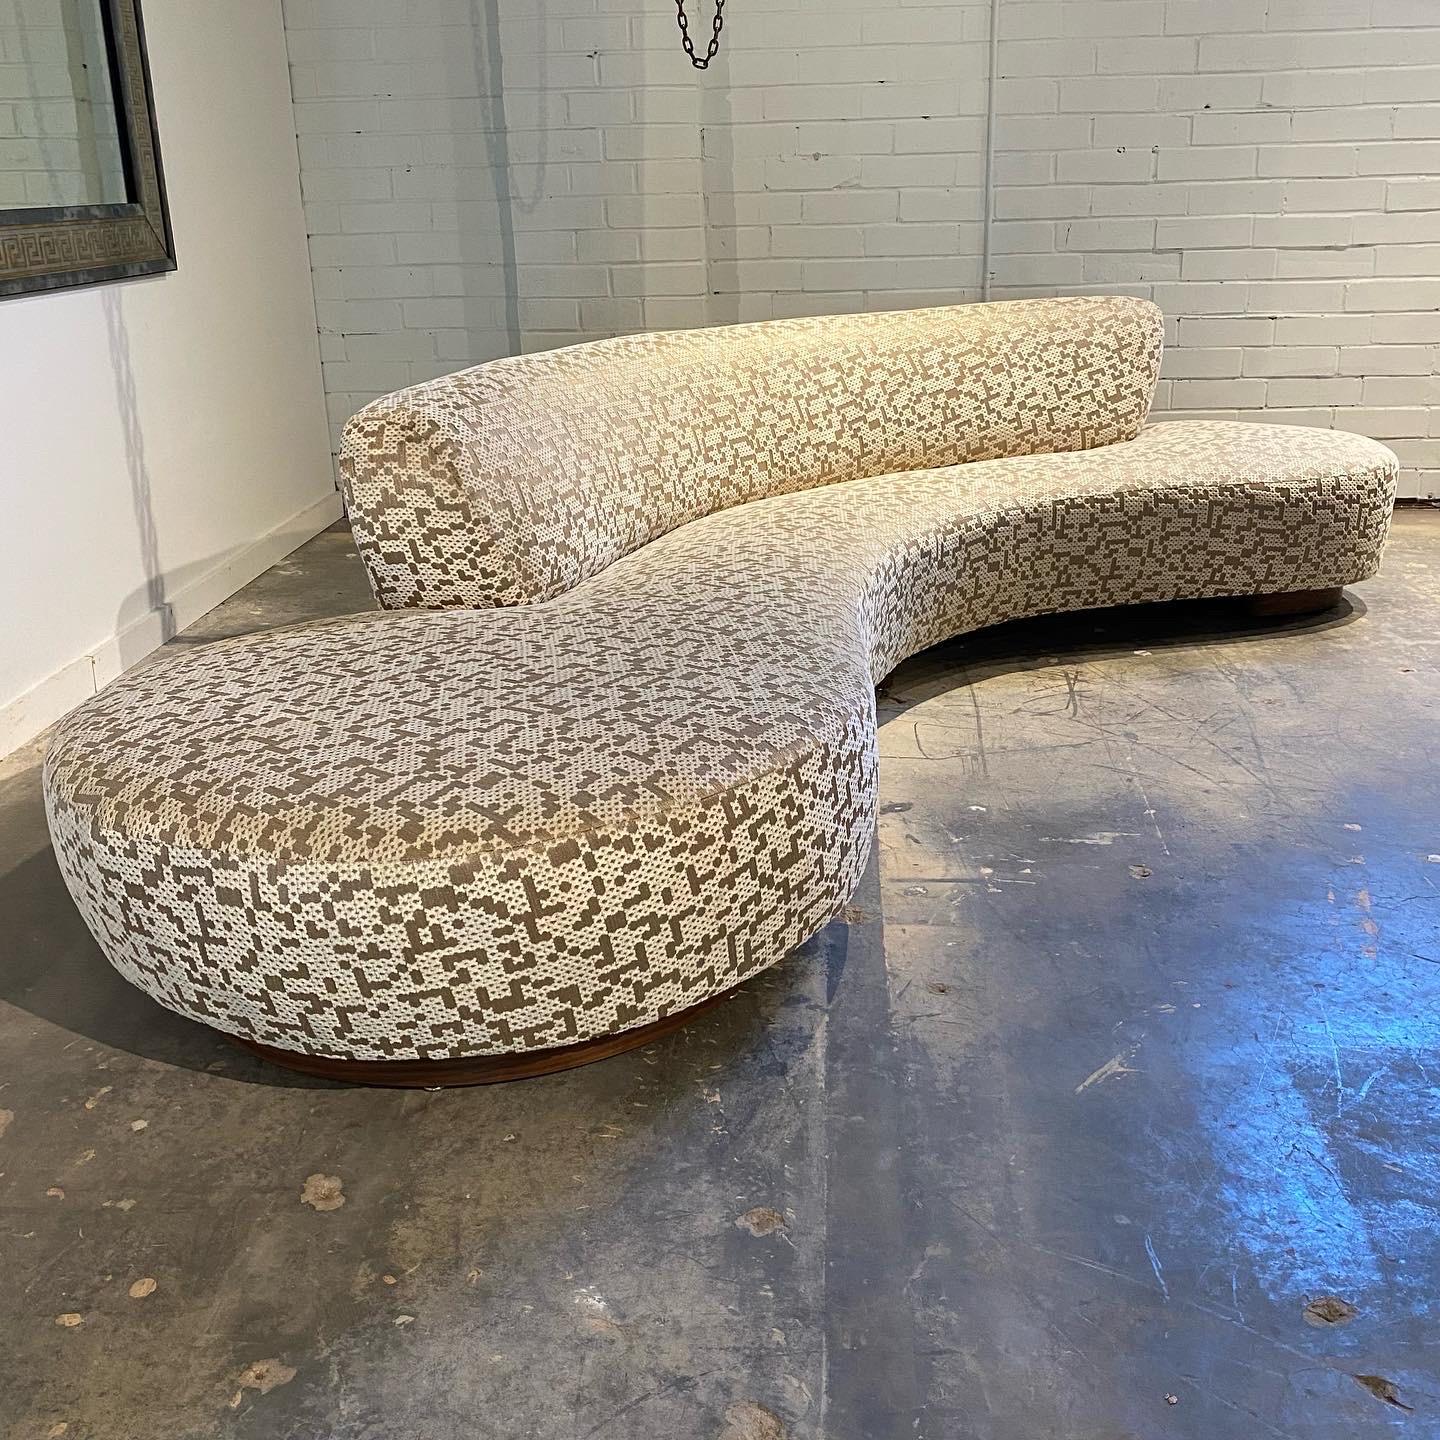 An incredible serpentine sofa from Vladimir Kagan designed in 1950. This example was originally upholstered in white leather with white lacquer bases, circa 2000. 
Now restored in a luxurious layered fabric of chenille with a handsome ground weave